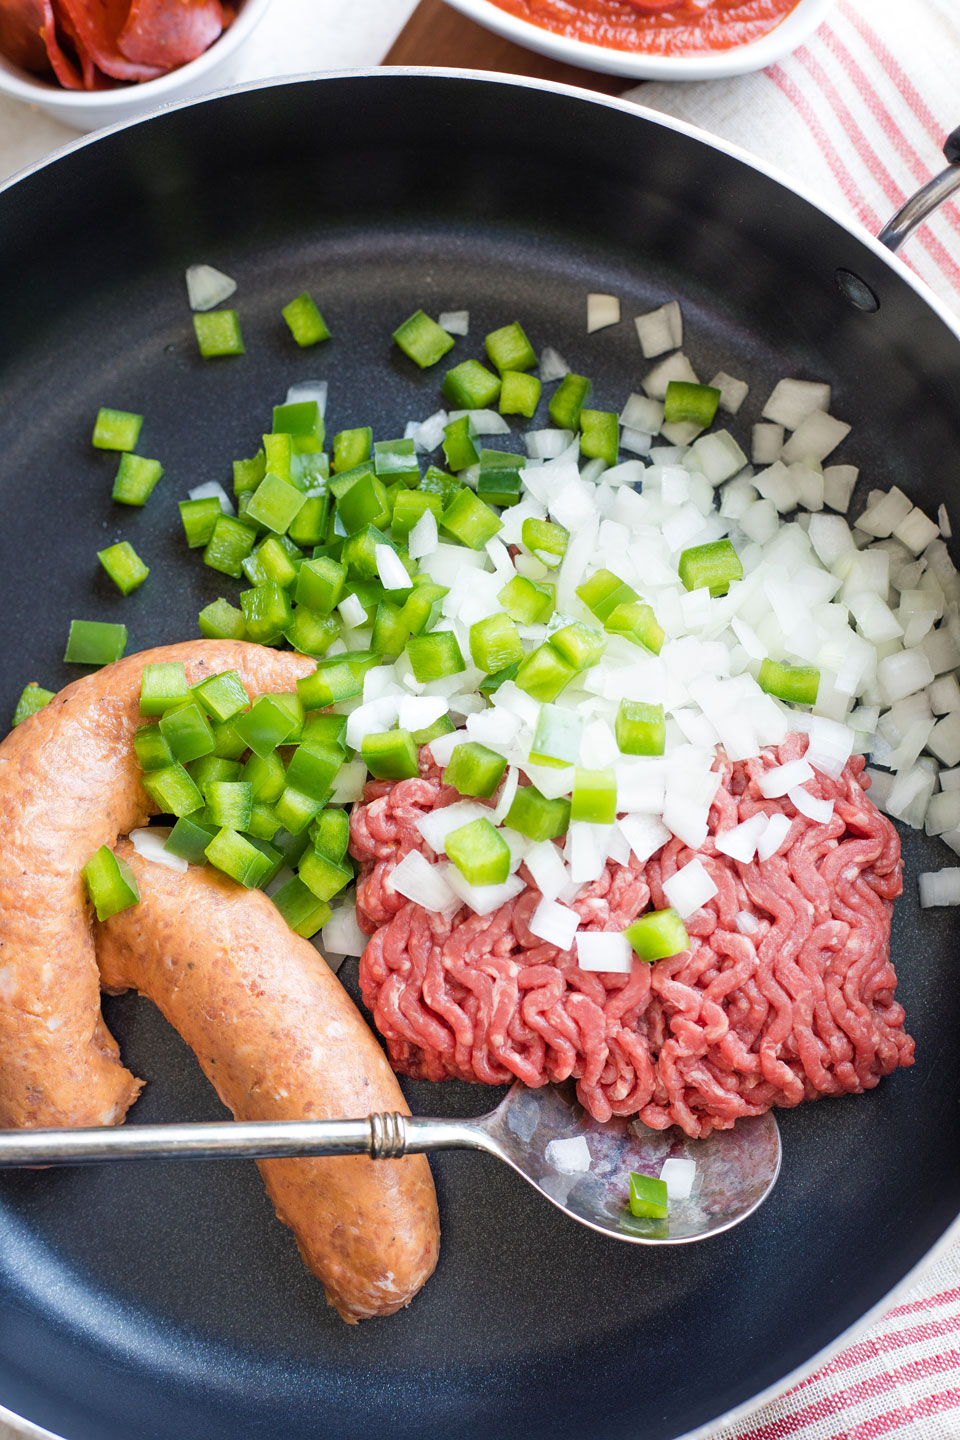 Nonstick skillet ready to cook Italian sausage, beef and diced veggies.